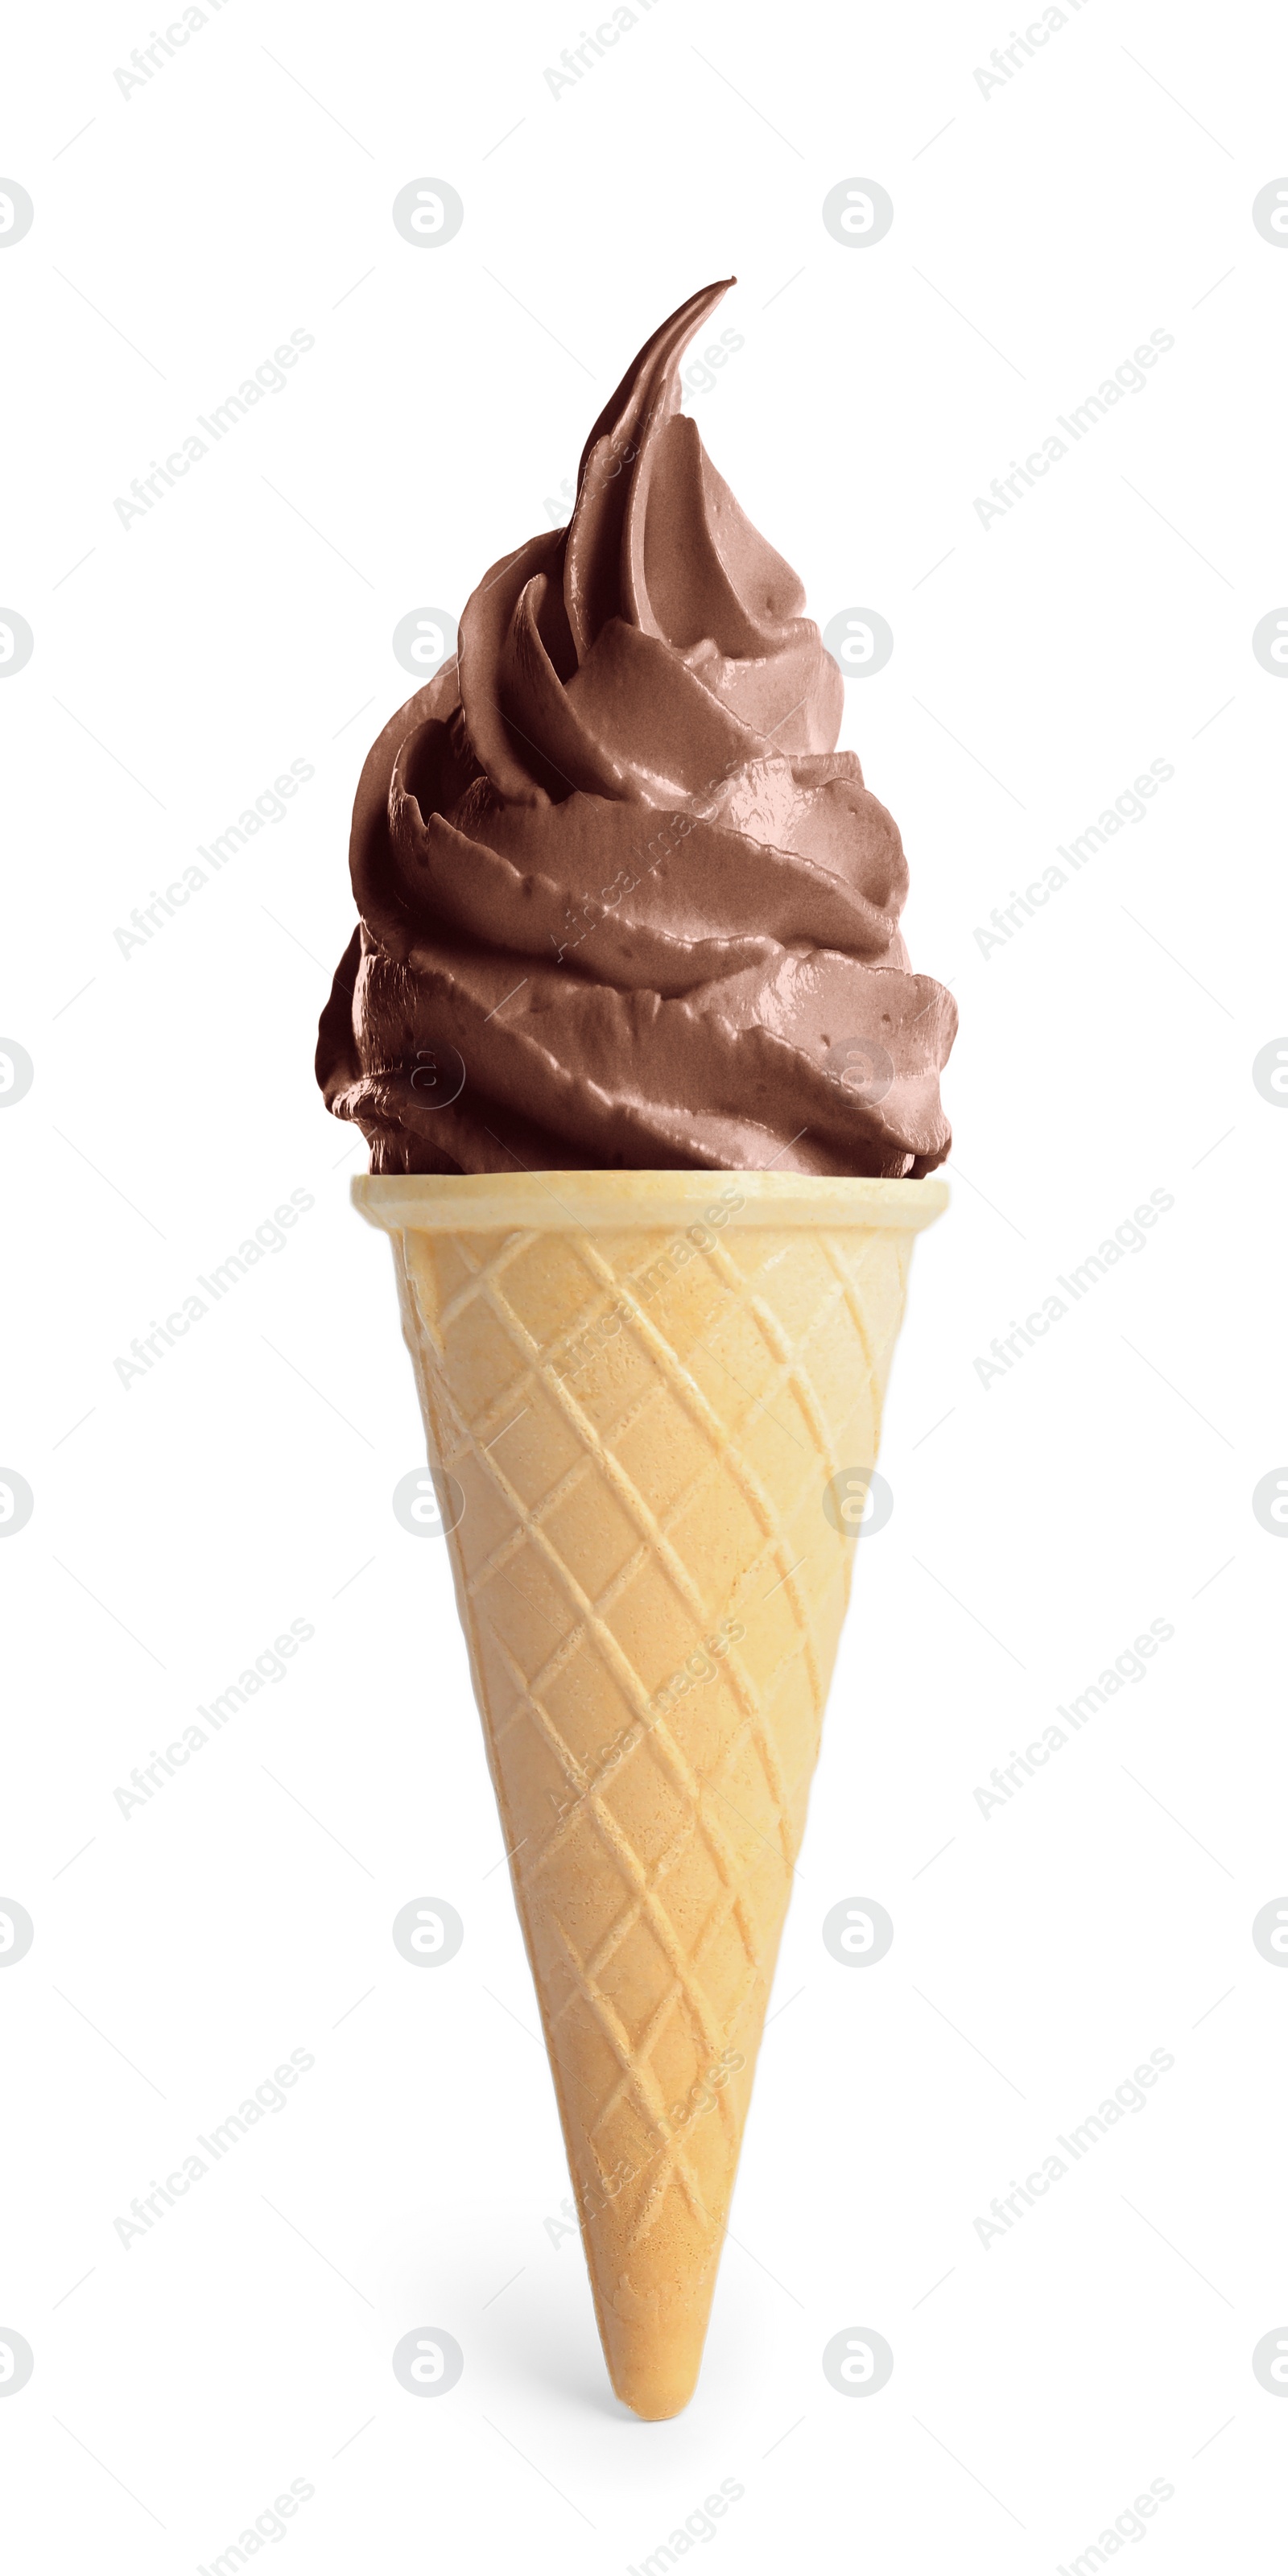 Image of Delicious soft serve chocolate ice cream in crispy cone isolated on white